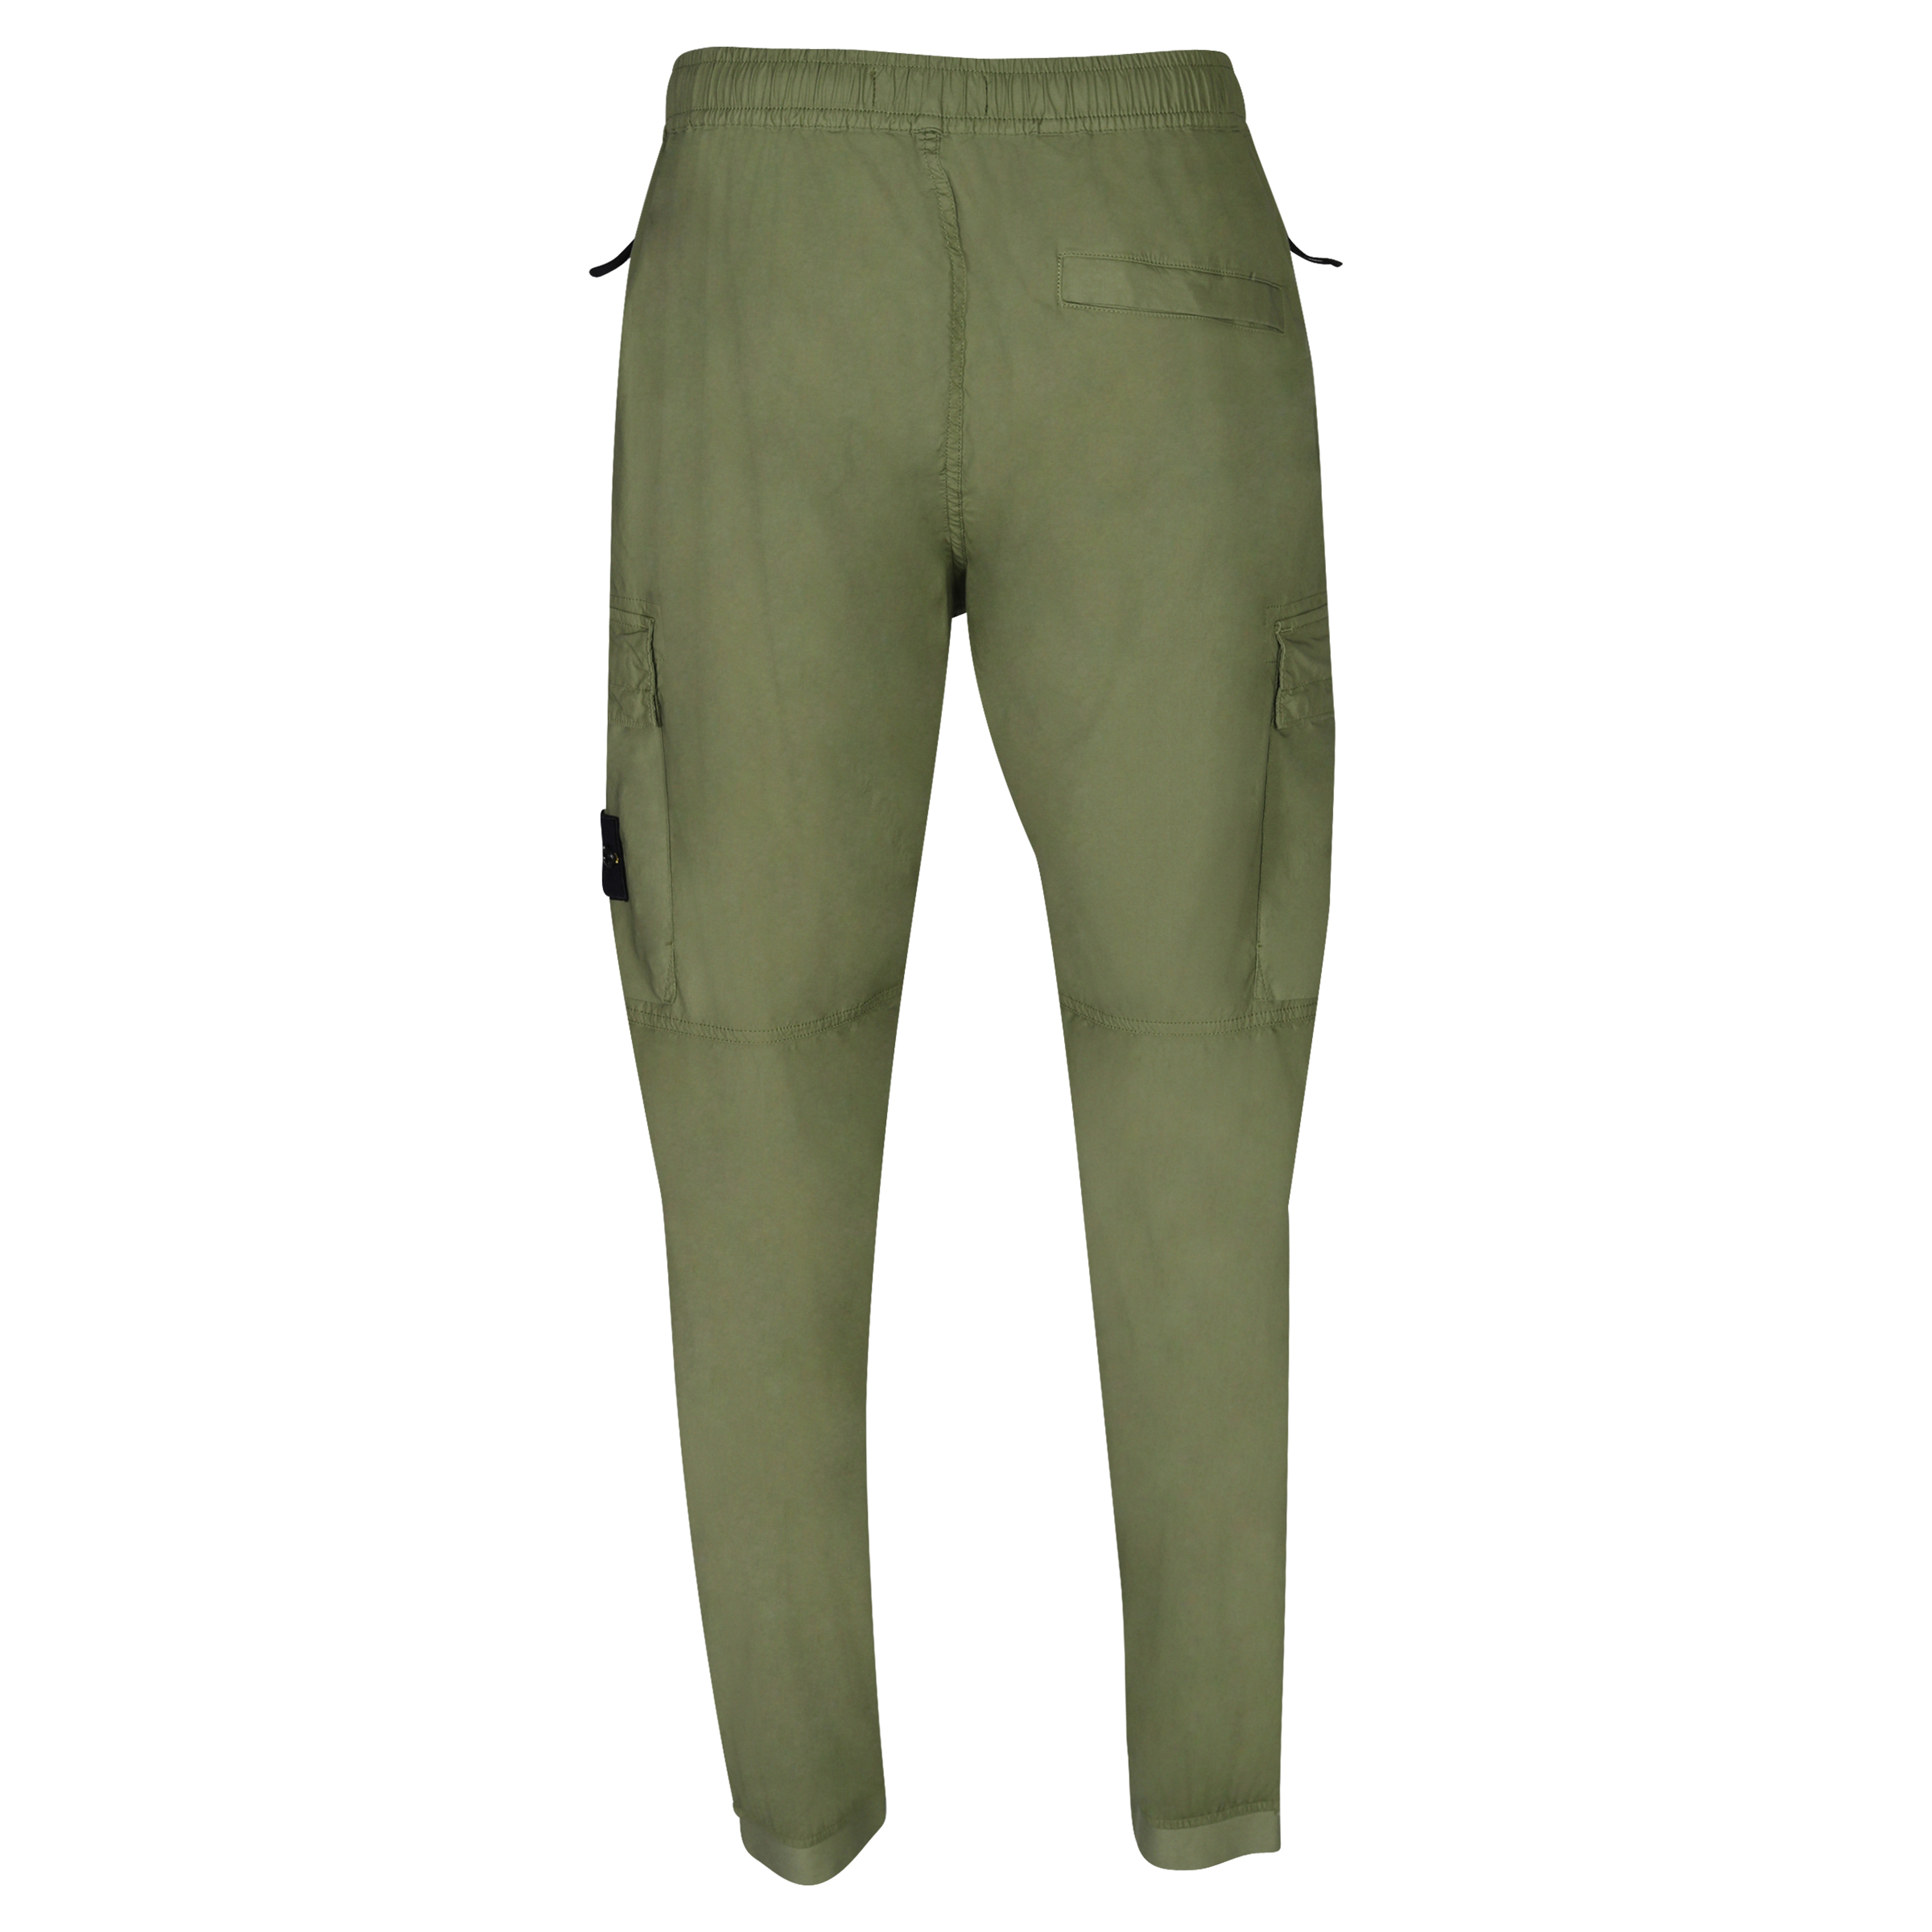 Stone Island Light Cargo Pant in Olive 31